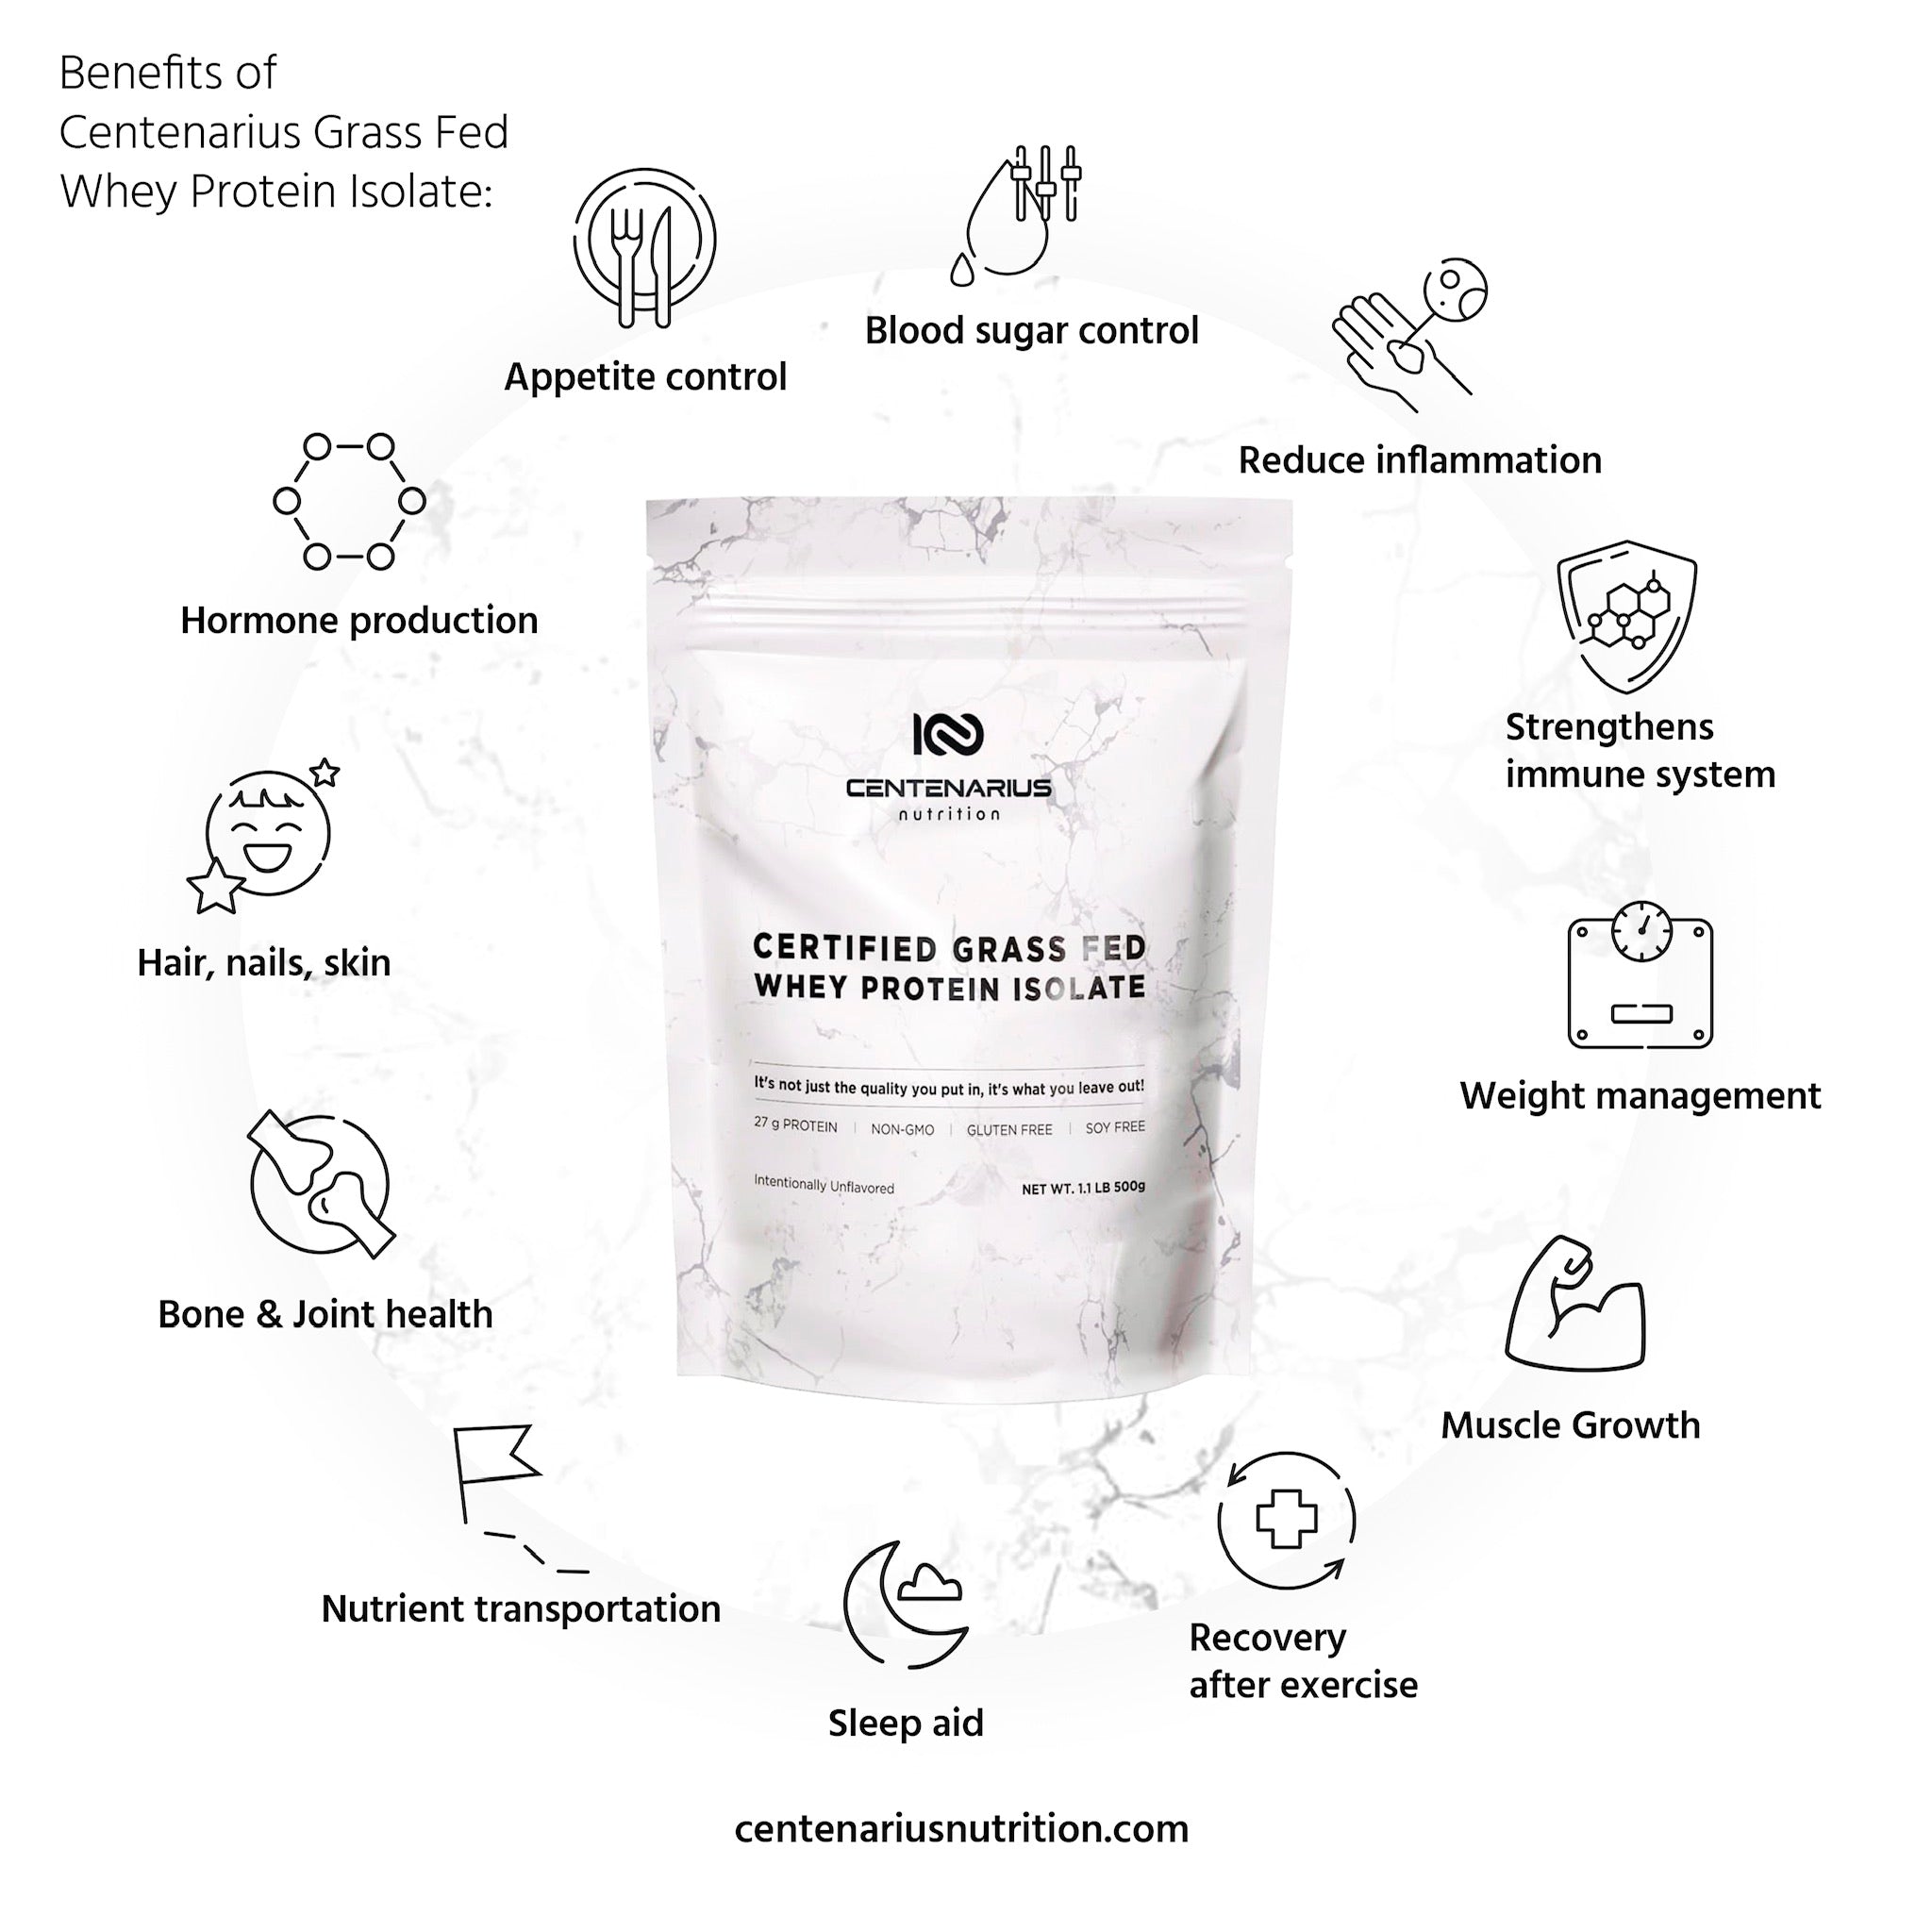 Certified Grass-fed Whey Protein Isolate, Easy to digest | Centenarius ...